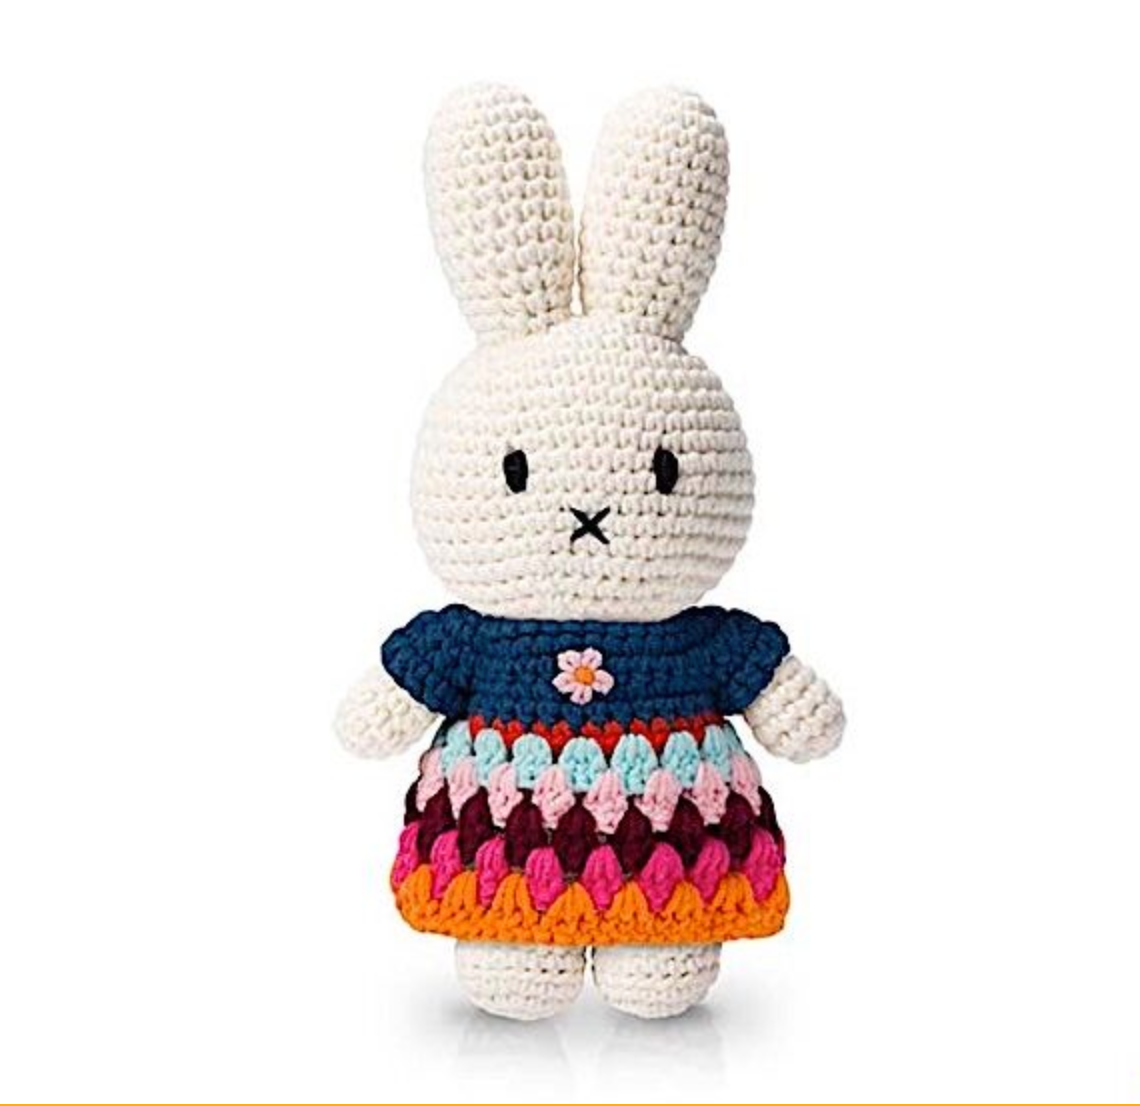 miffy handmade and her rainbow dress (65th anniversary special edition)